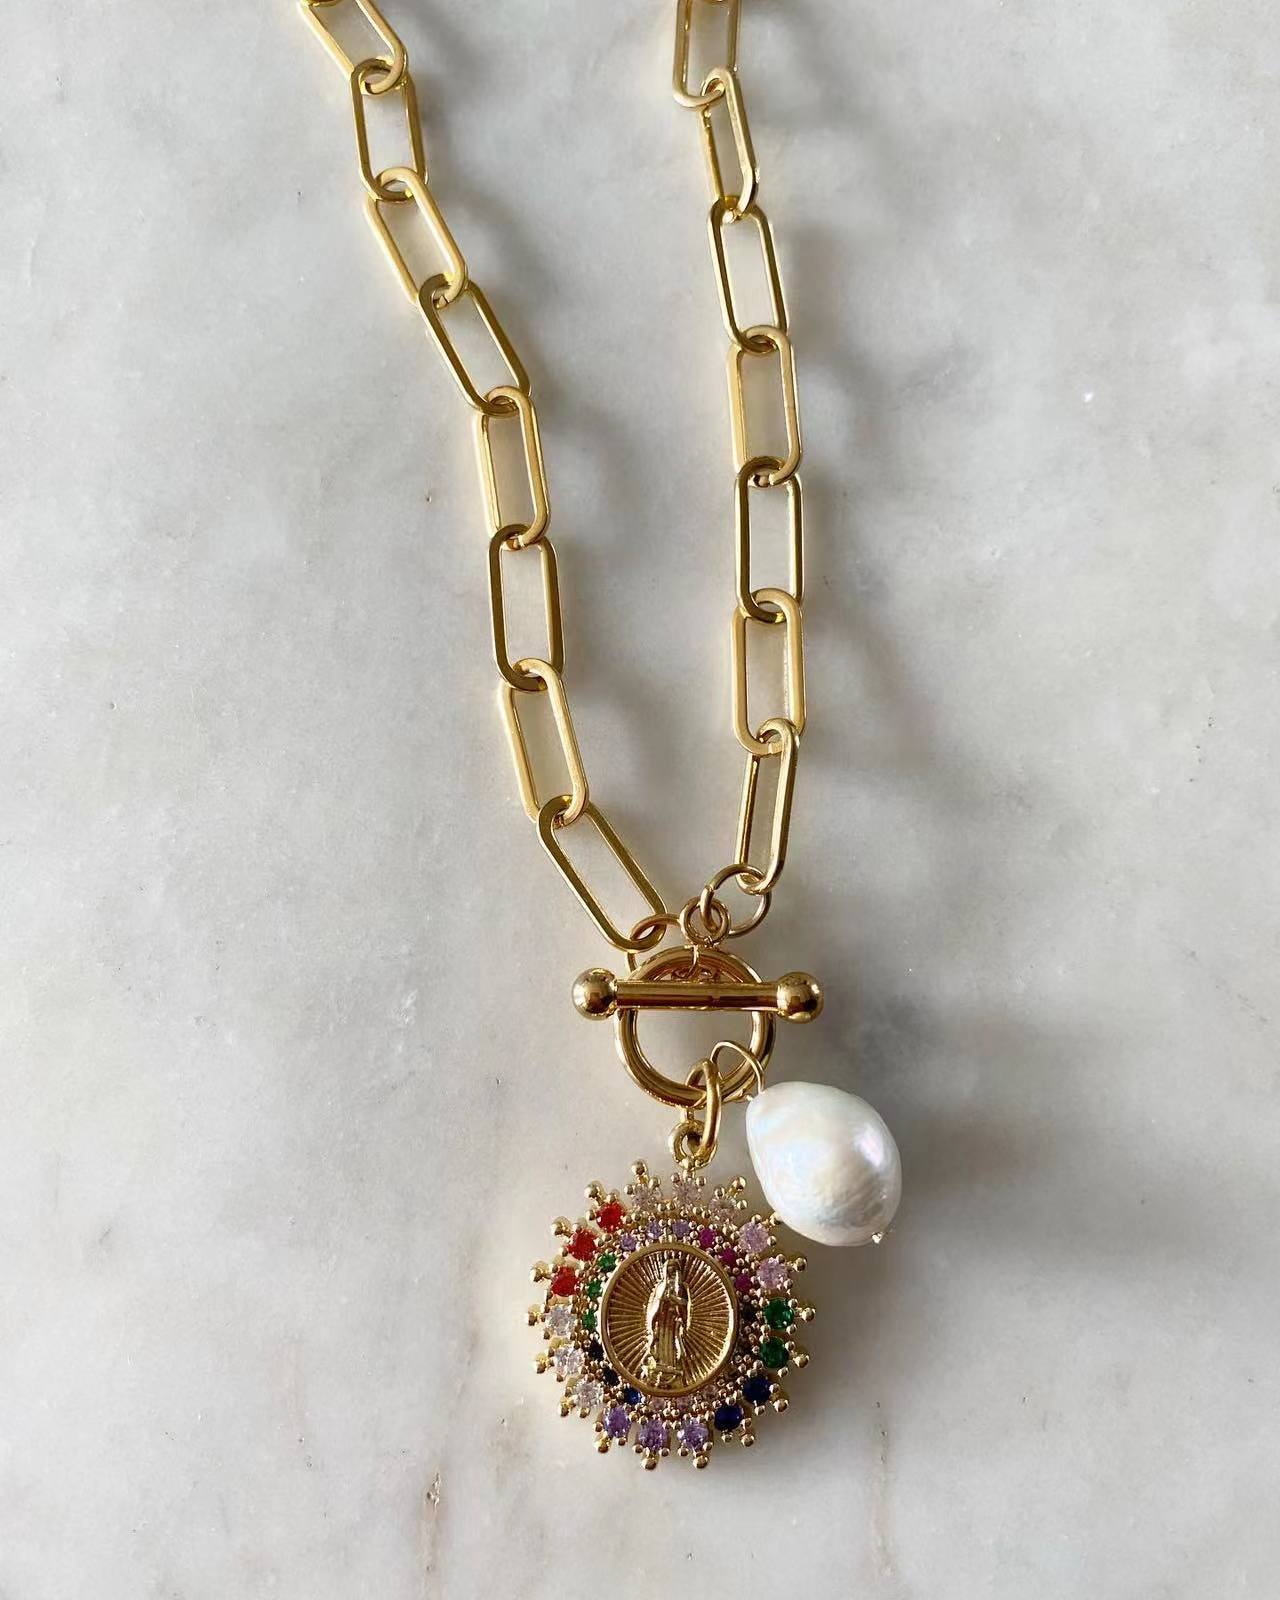 Multicolored Our Lady of Guadalupe Toggle Lock Necklace with Pearl